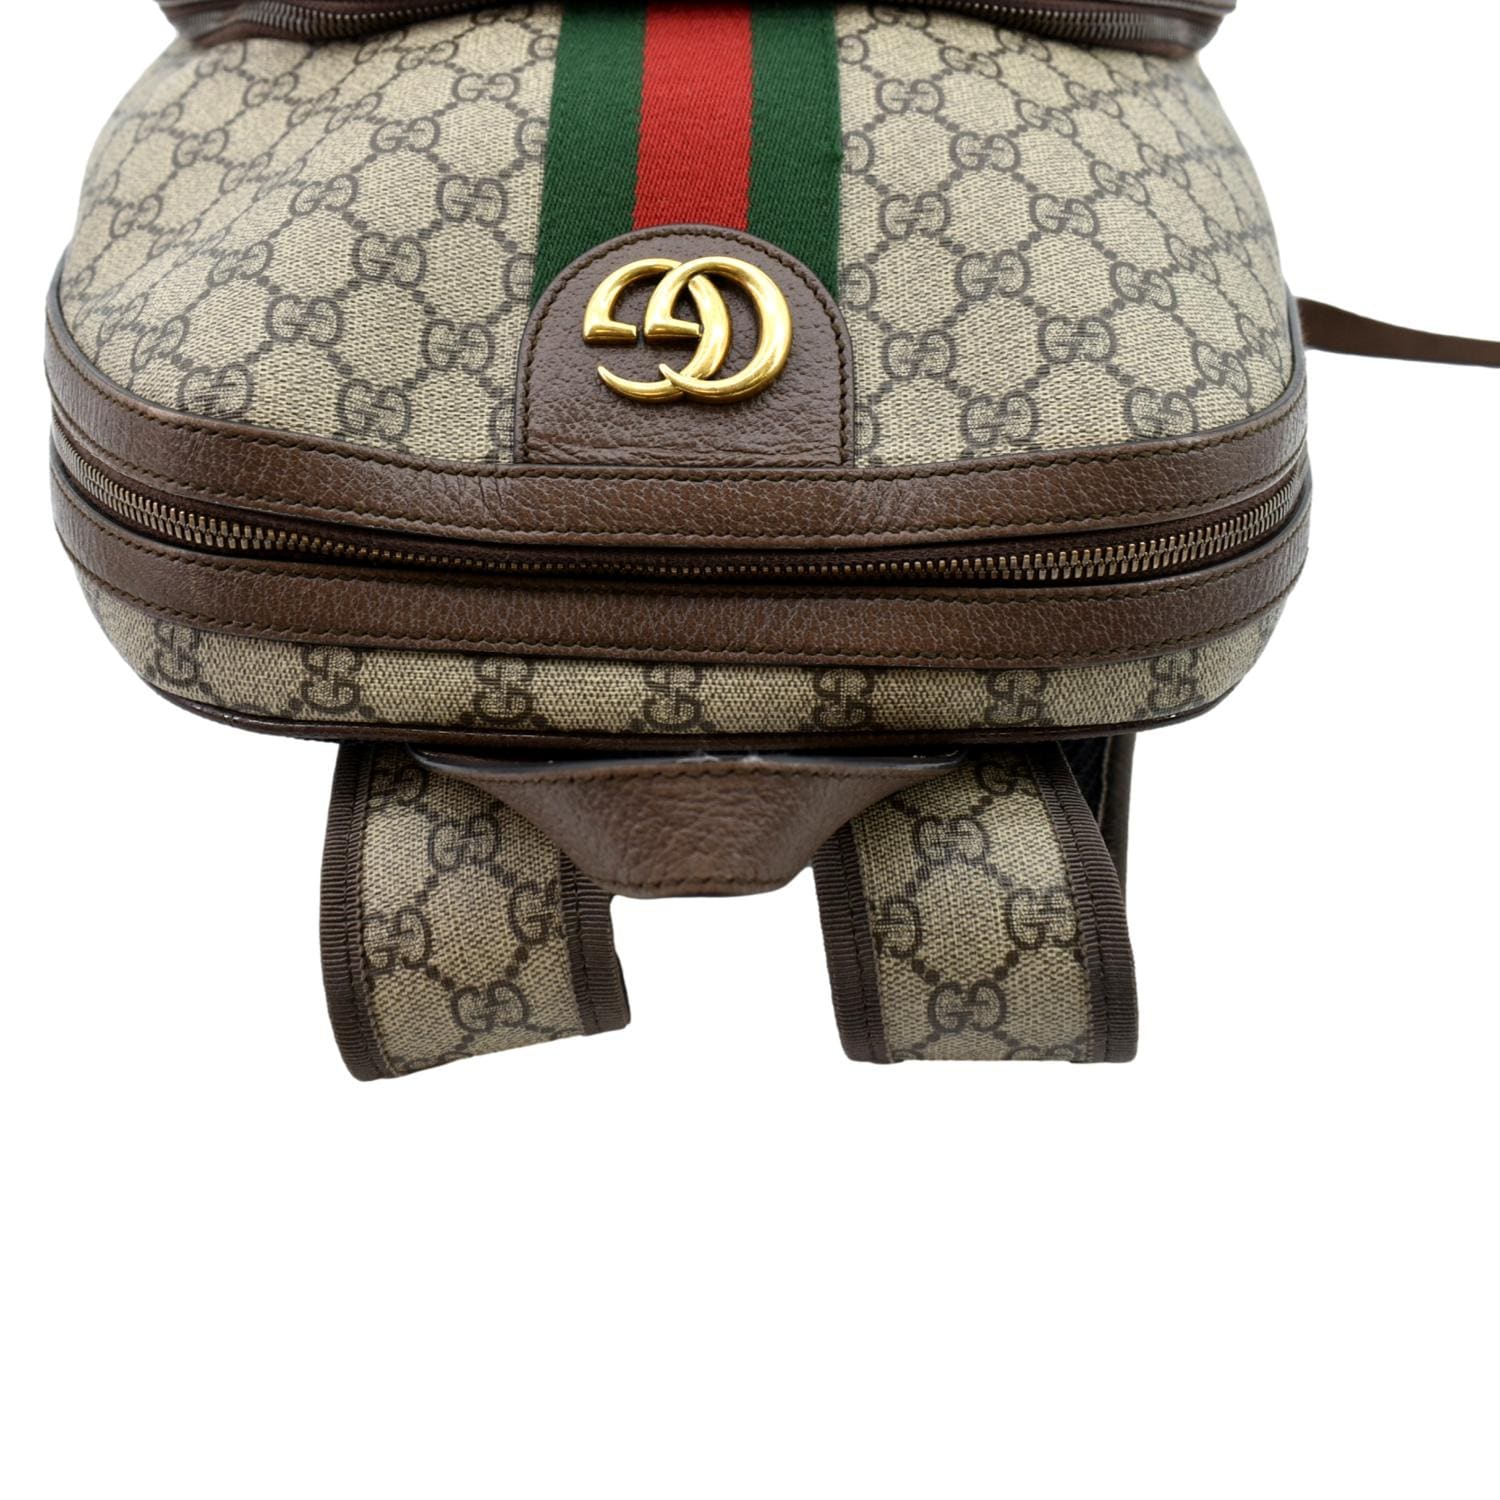 Ophidia GG Medium Canvas Backpack in Beige - Gucci